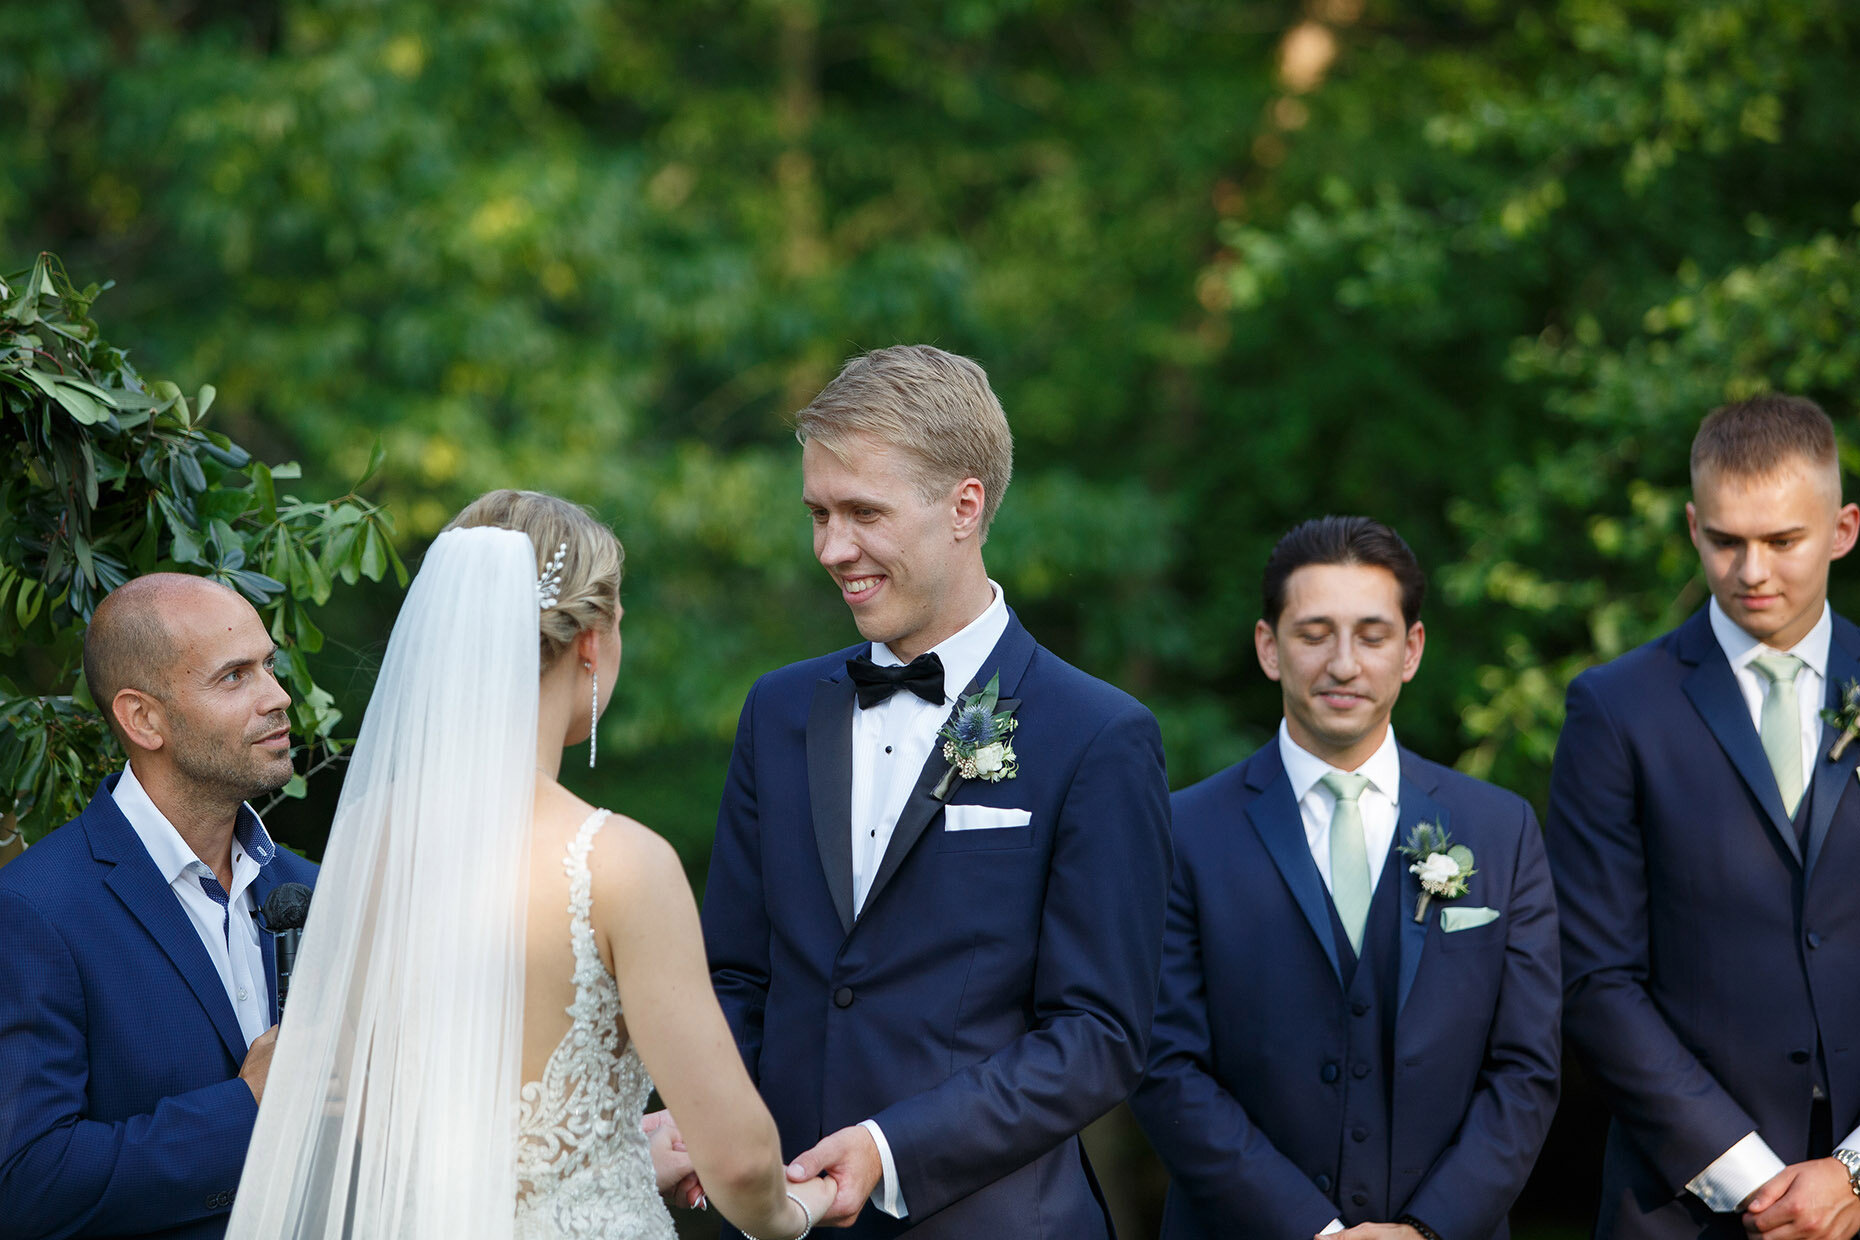 Groom's reaction to vows at ceremony